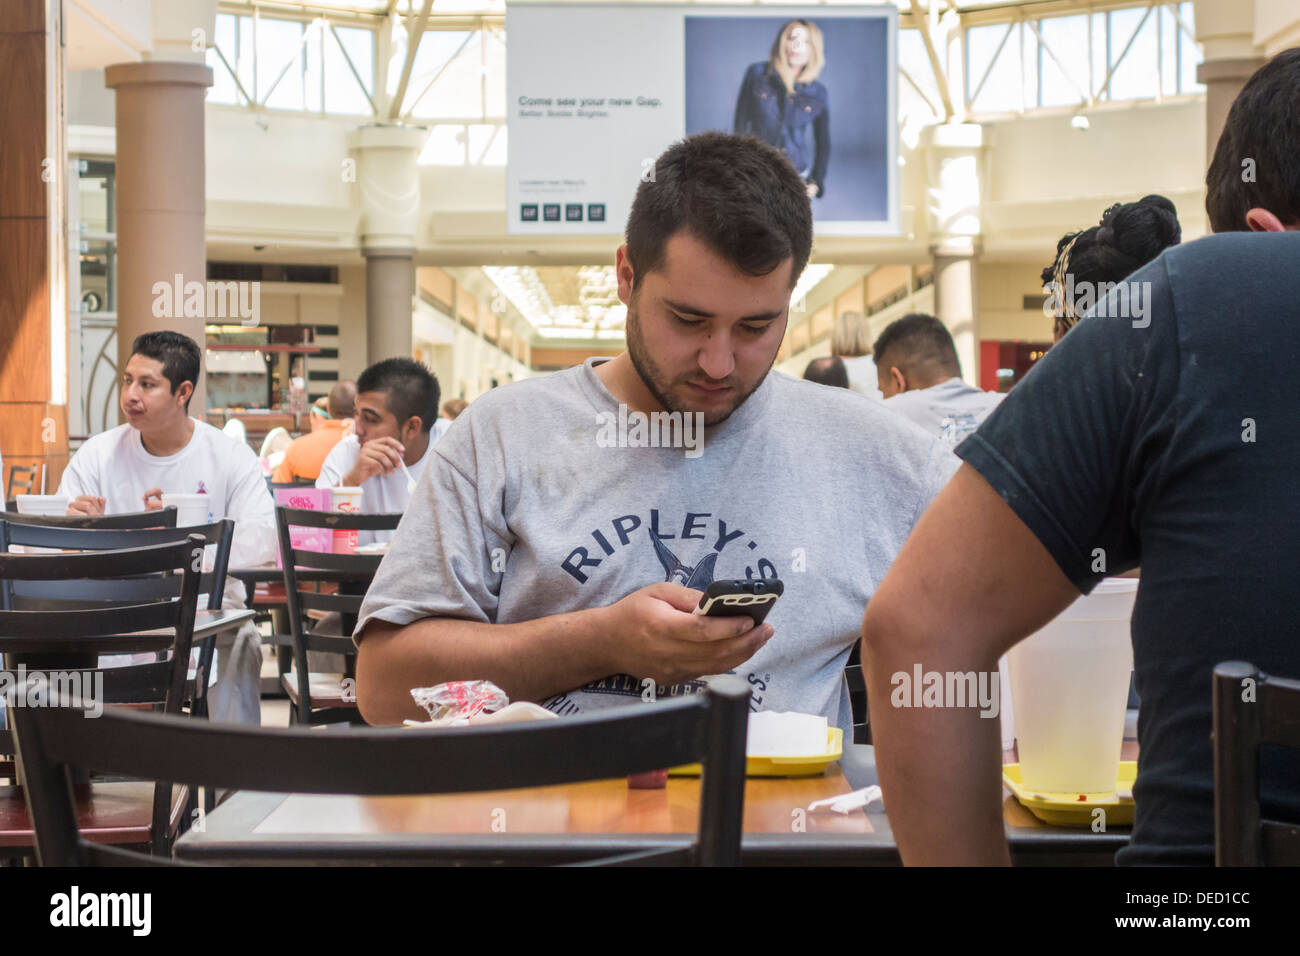 Food court at Valley View Mall in Roanoke, VA, USA Stock Photo - Alamy